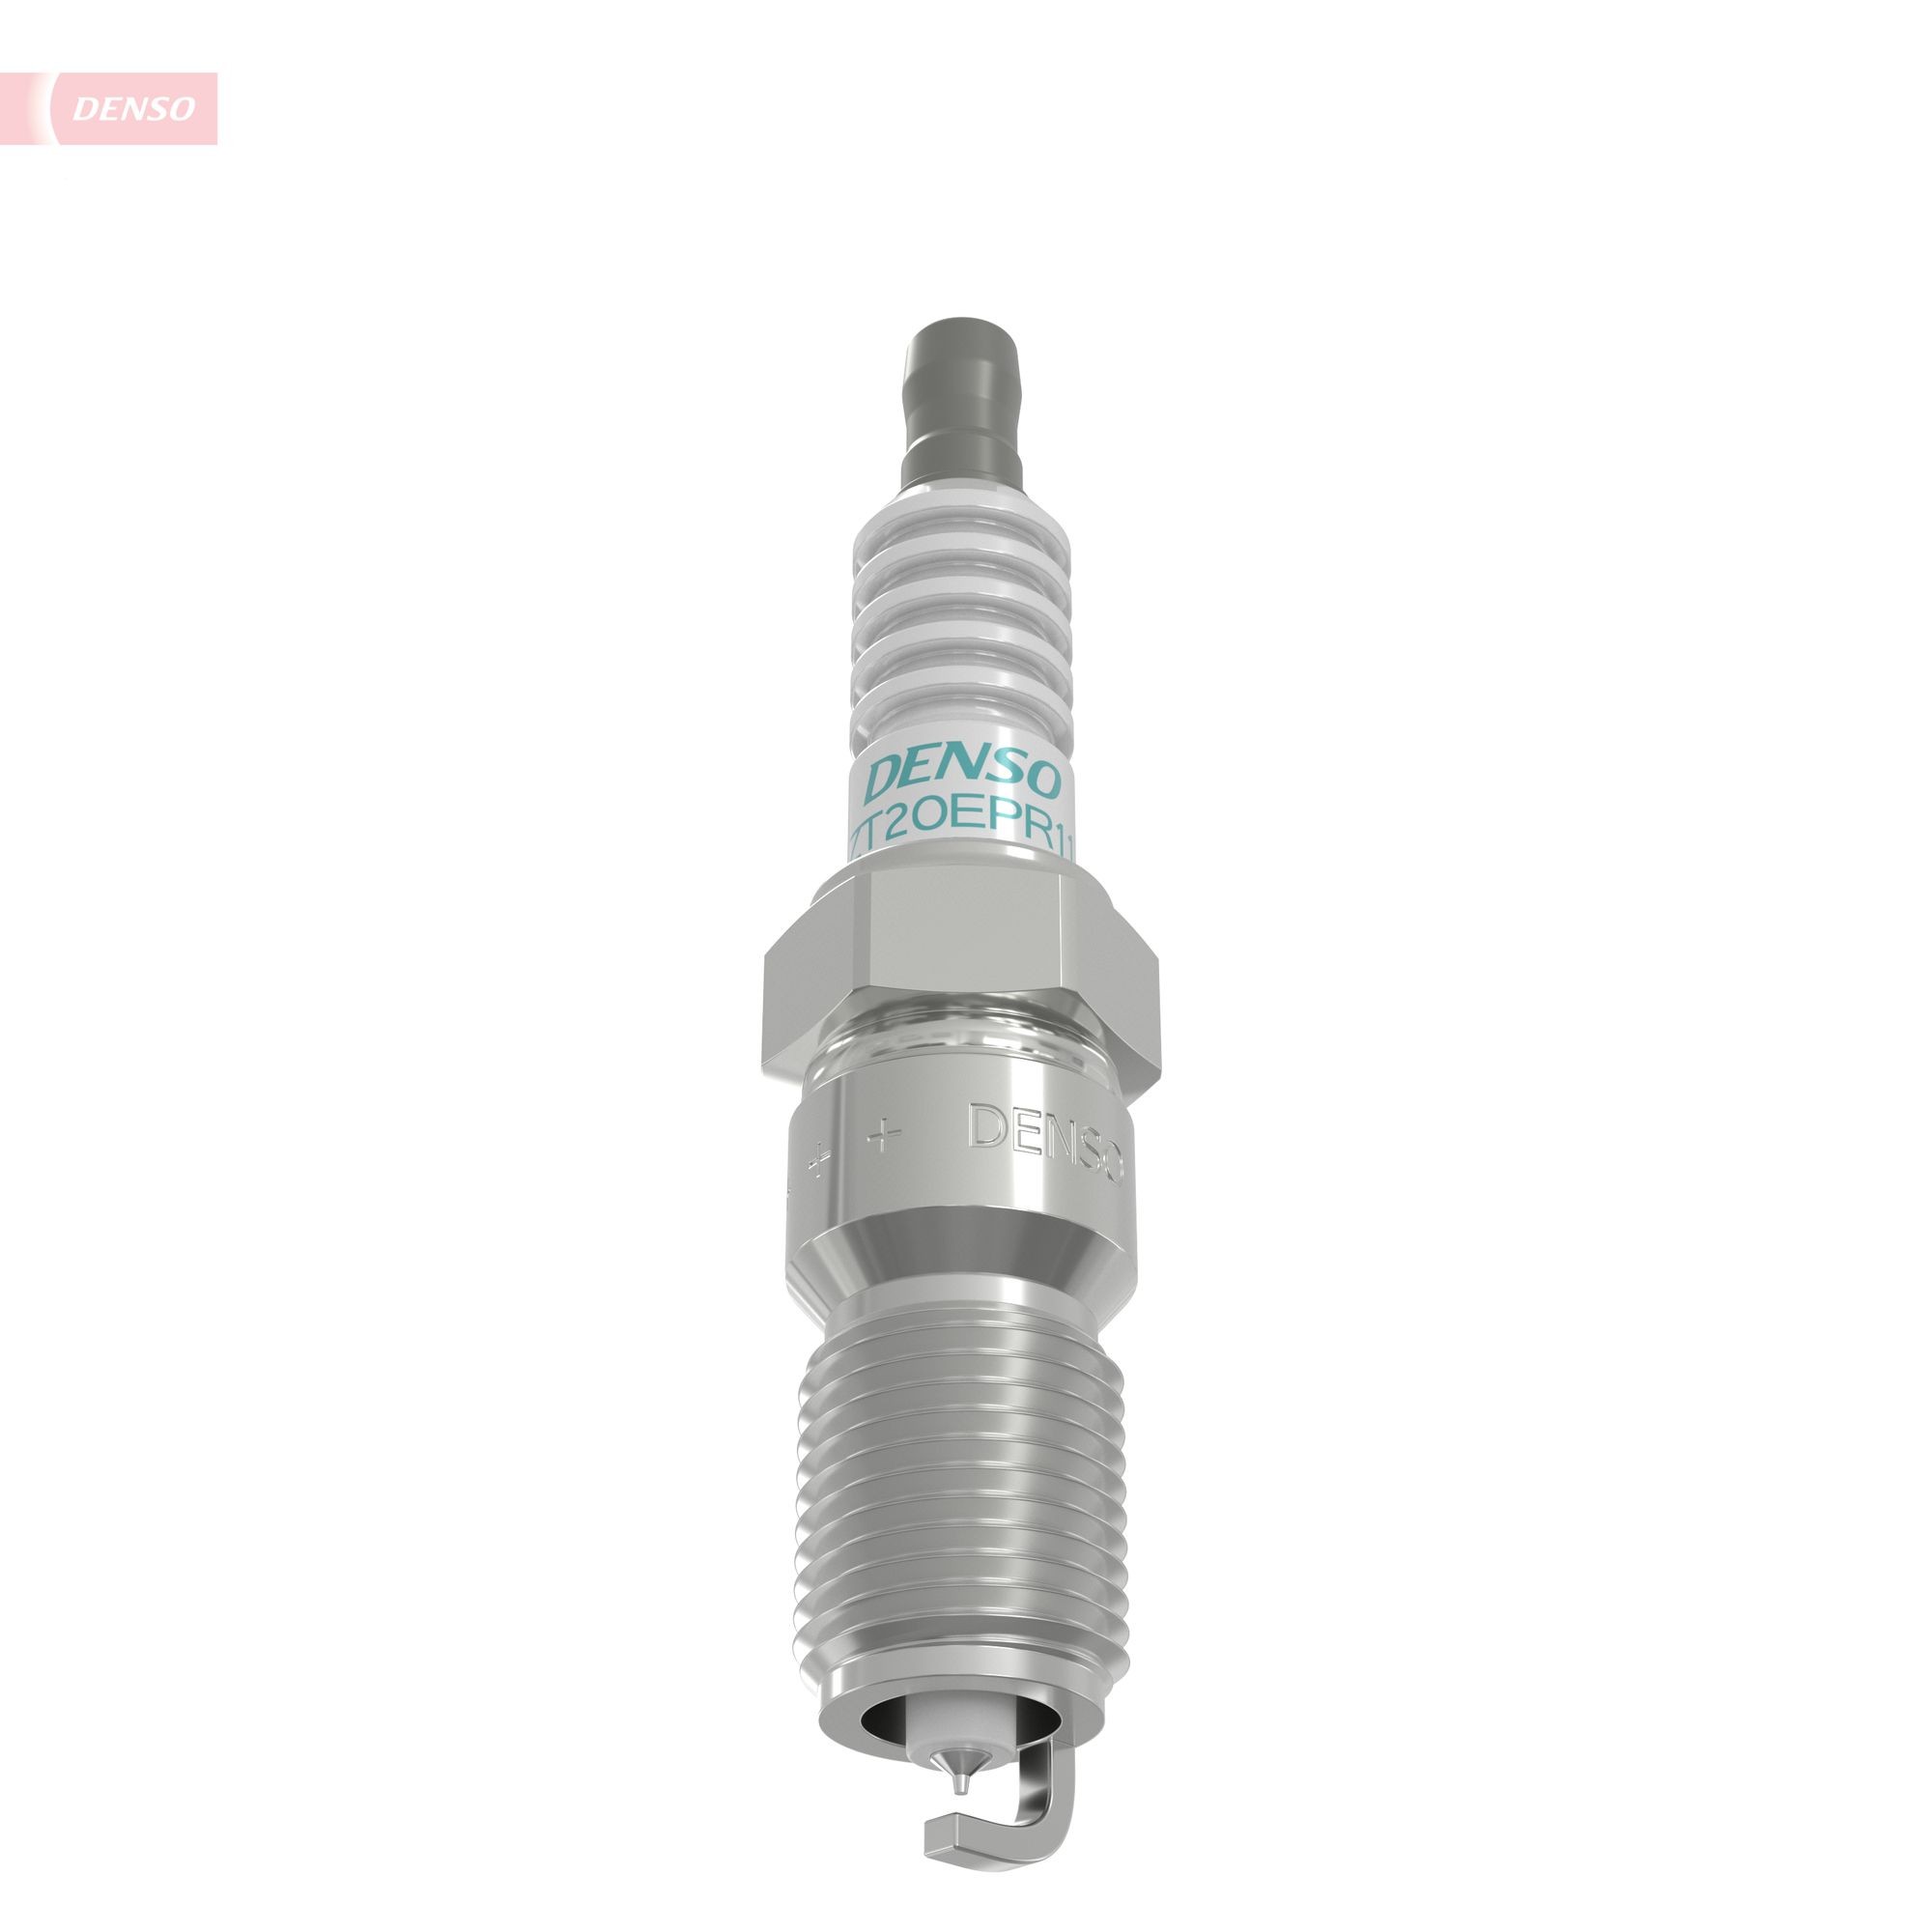 DENSO Spark plugs 5087 buy online